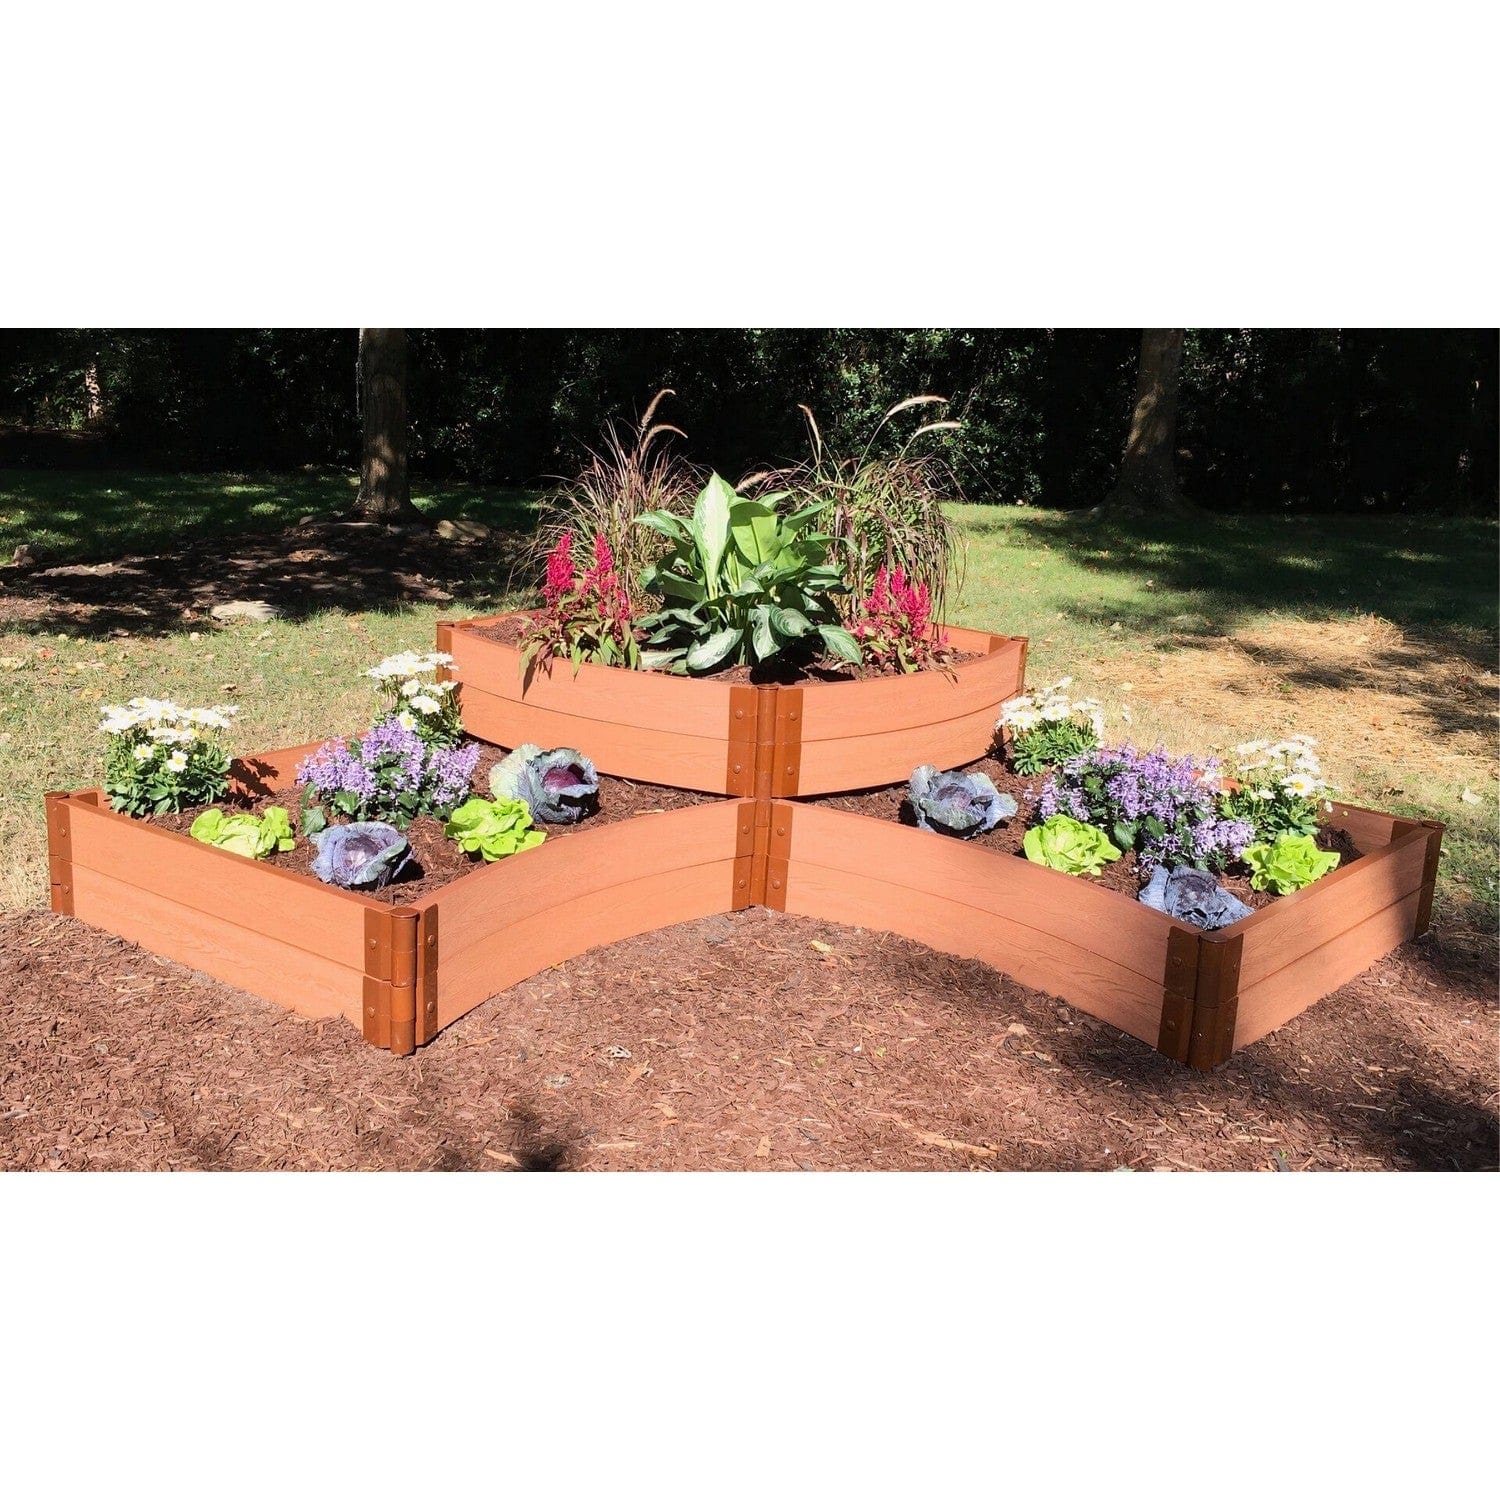 Frame It All Gardening Accessories Frame It All | Tool-Free Teardrop Curved Corner Raised Garden Bed (2-Tier) 8' X 8' X 11" - Classic Sienna - 1" Profile 800002006